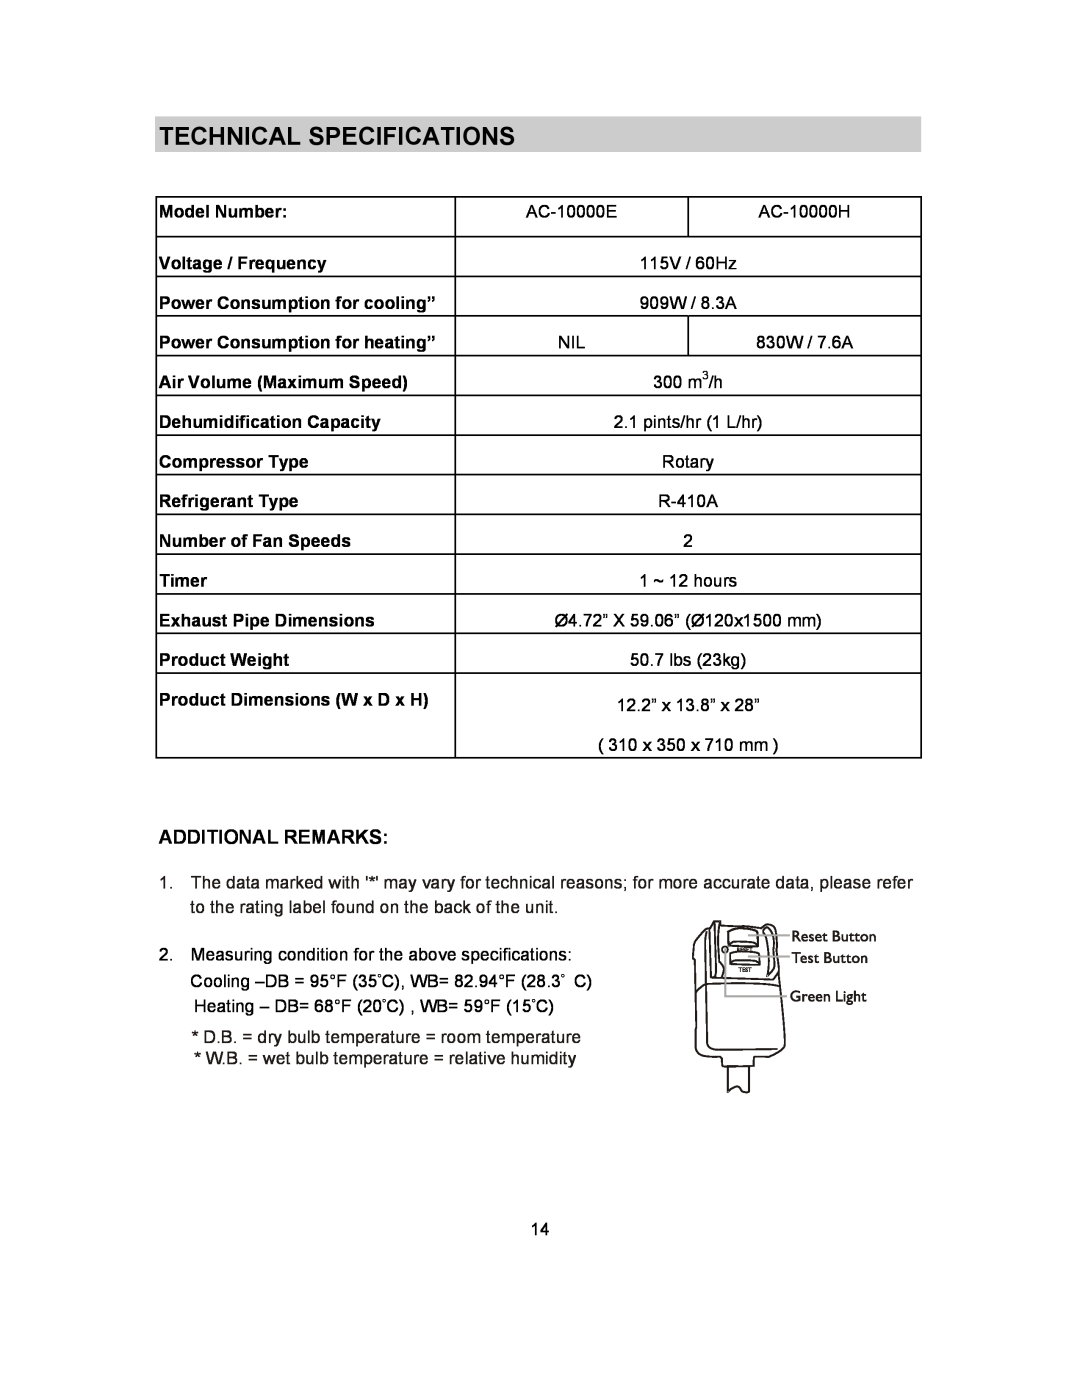 NewAir AC-10000E, AC-10000H owner manual Technical Specifications, Additional Remarks 